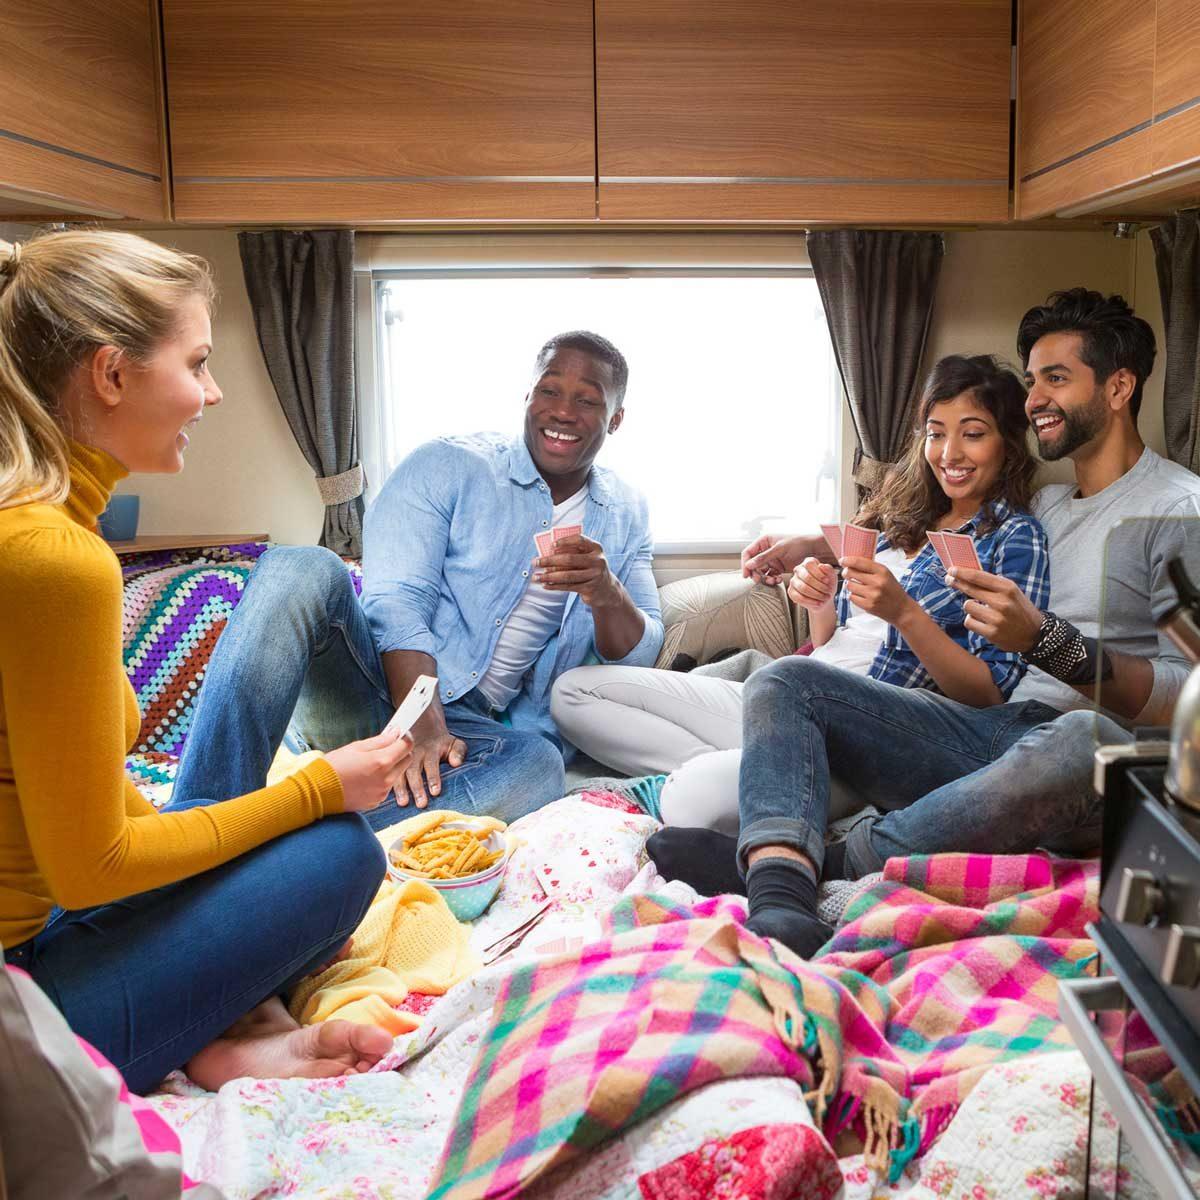 7 Tips to Make Your RV Feel Like Home